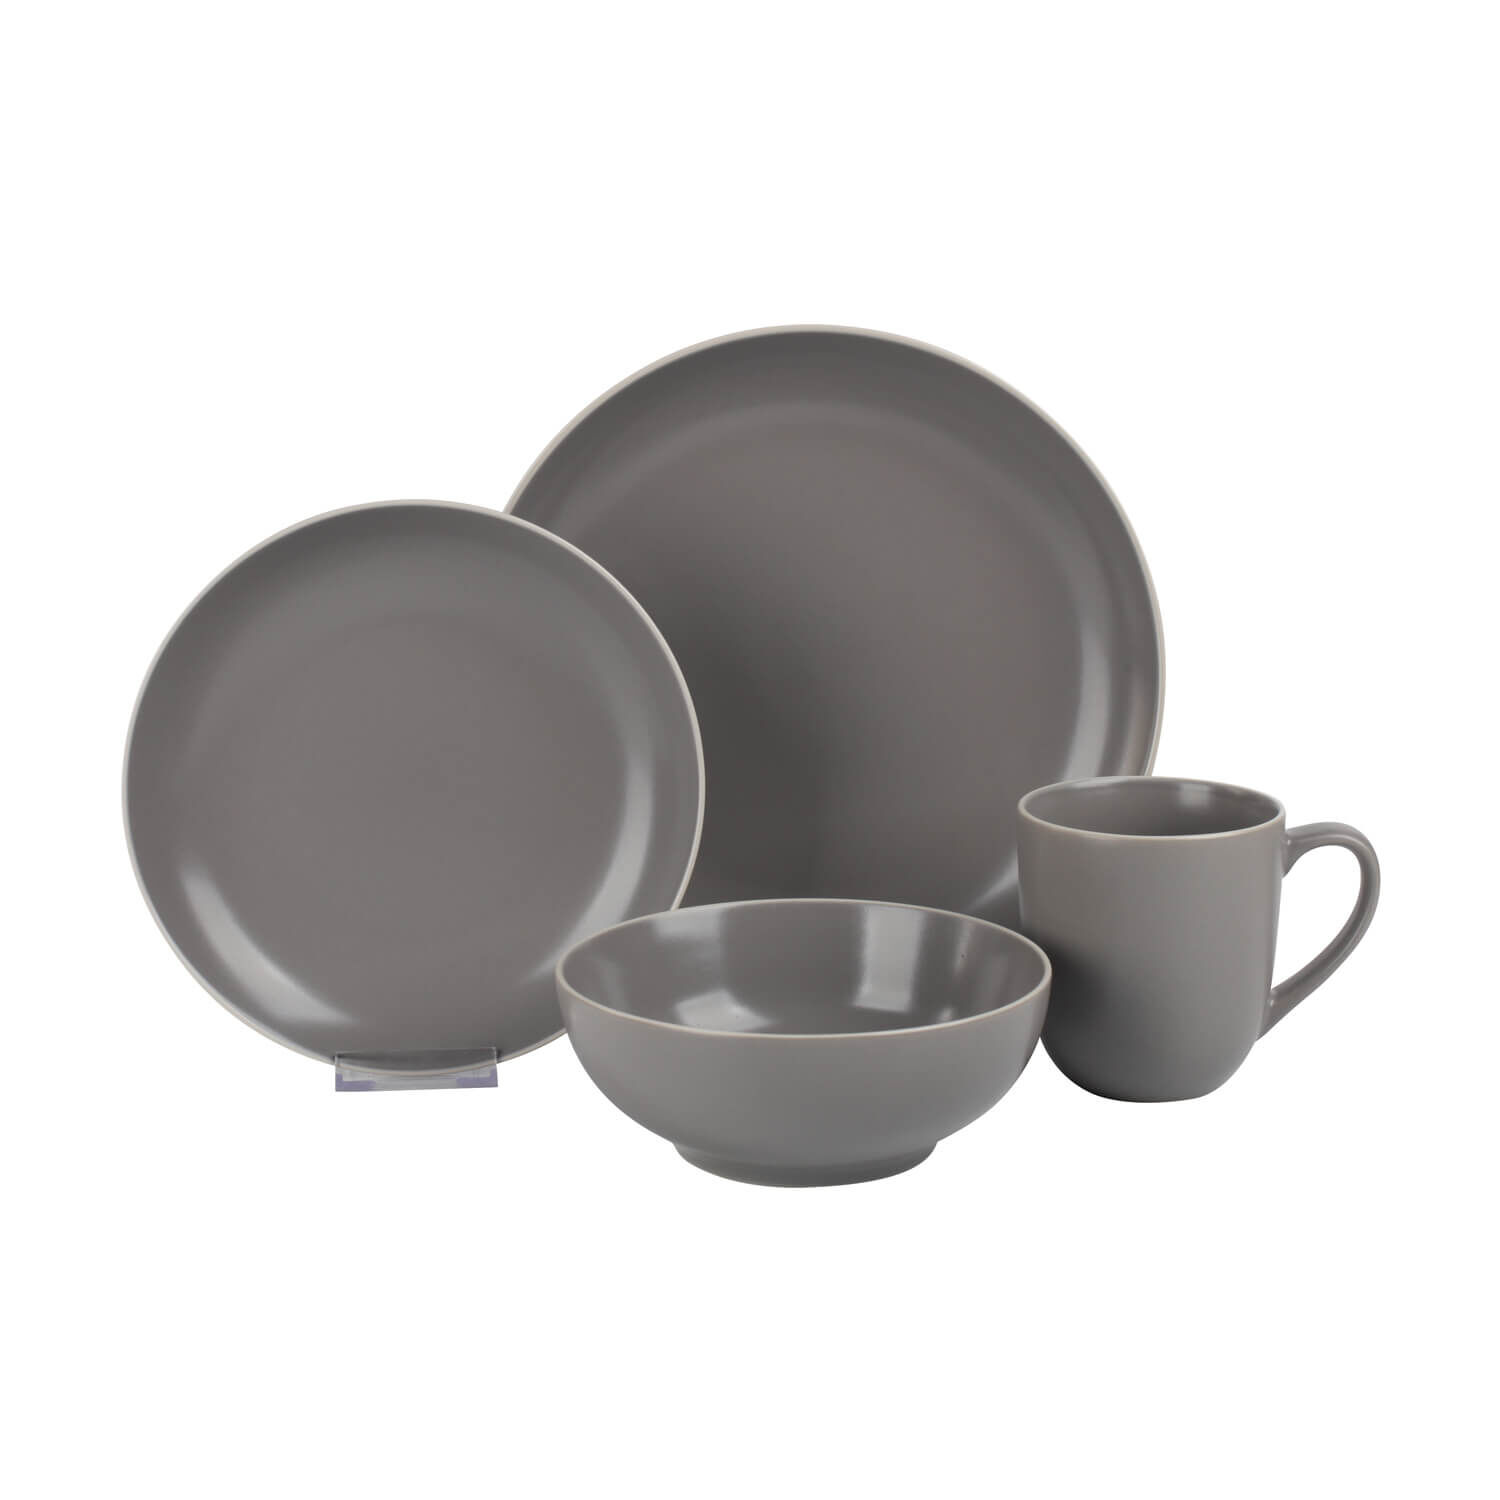 Wensley Stone 16 Piece Dinner Set - Home Store + More